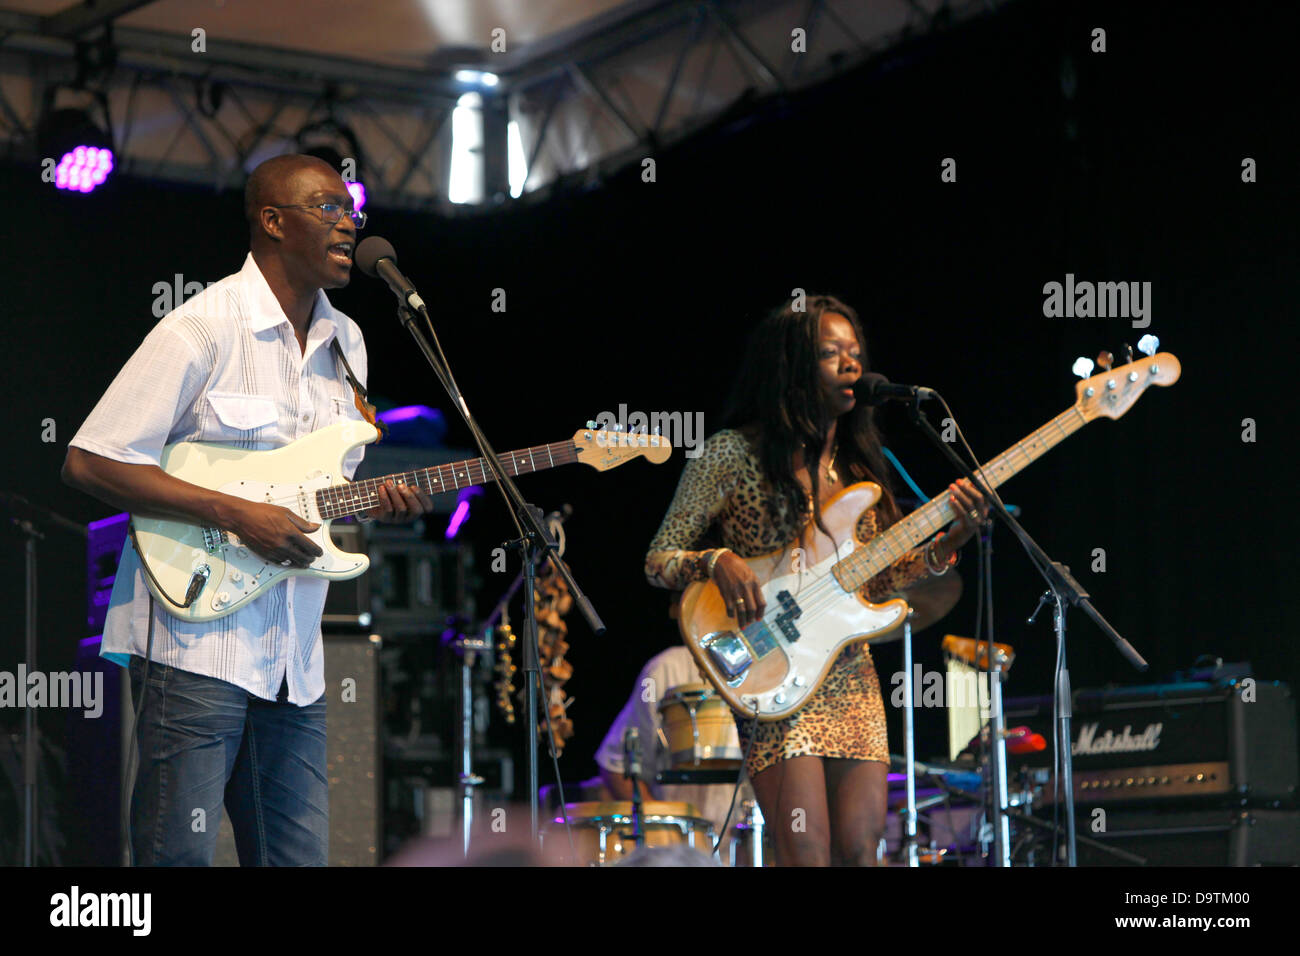 Black artists playing guitar and singing on stage during multicultural open air summer music festival Fête de la Musique in downtown (old city) Geneva, Switzerland. Credit:  ImageNature, Alexander Belokurov / Alamy Stock Photo